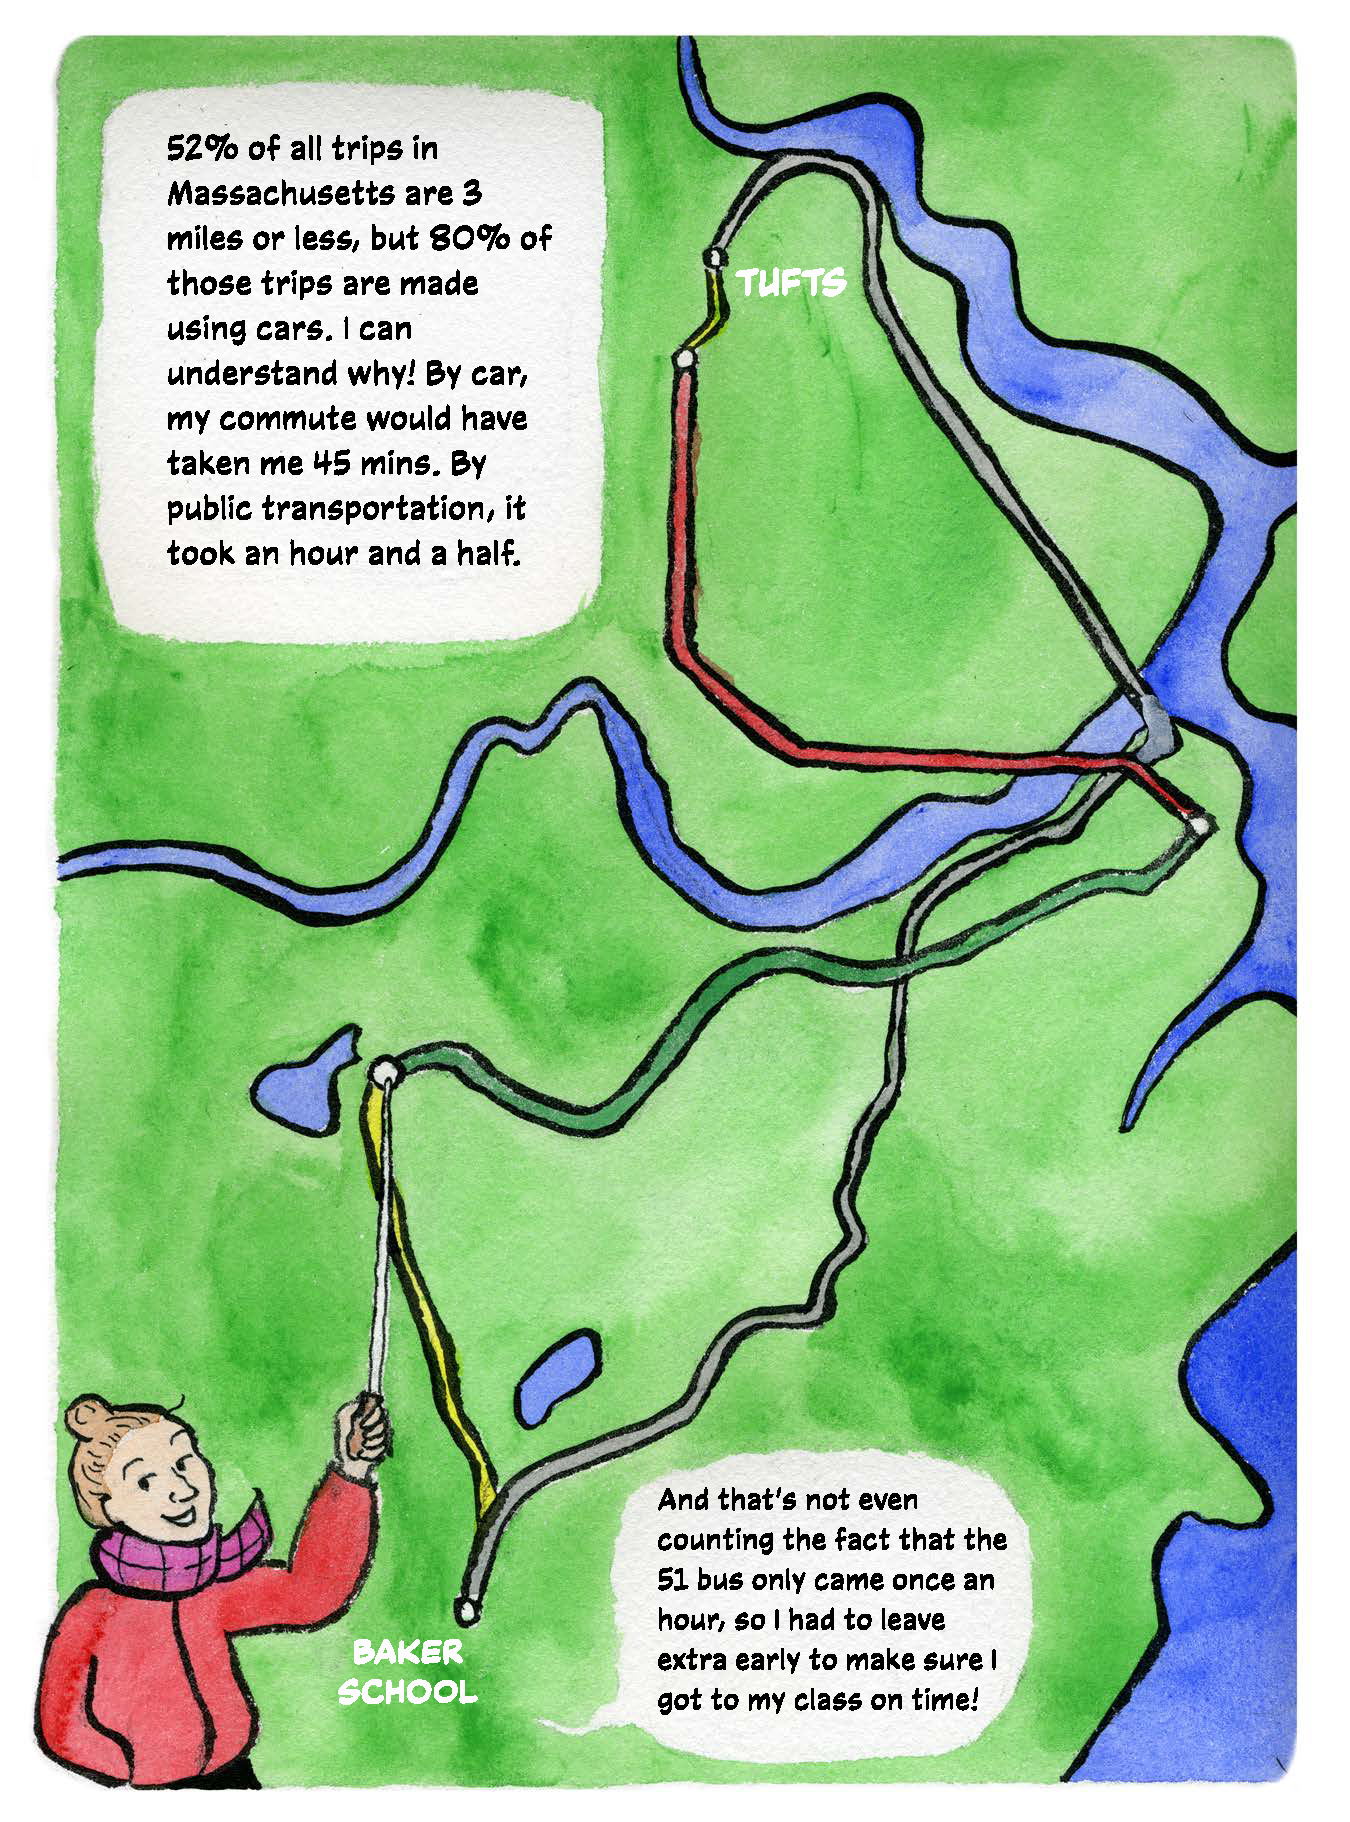 Illustration: woman with a pointer shows the route from Tufts to the Baker School, which includes two bus routes, the green line, and the red line. Text: 52% of all trips in Massachusetts are three miles or less, but 80% of those trips are made using cars. I can understand why! By car, my commute would have taken me 45 minutes. By public transportation, it took an hour and a half. And that's not even counting the fact that the 51 bus only came once an hour, so I had to leave extra early to make sure I got to my class on time!